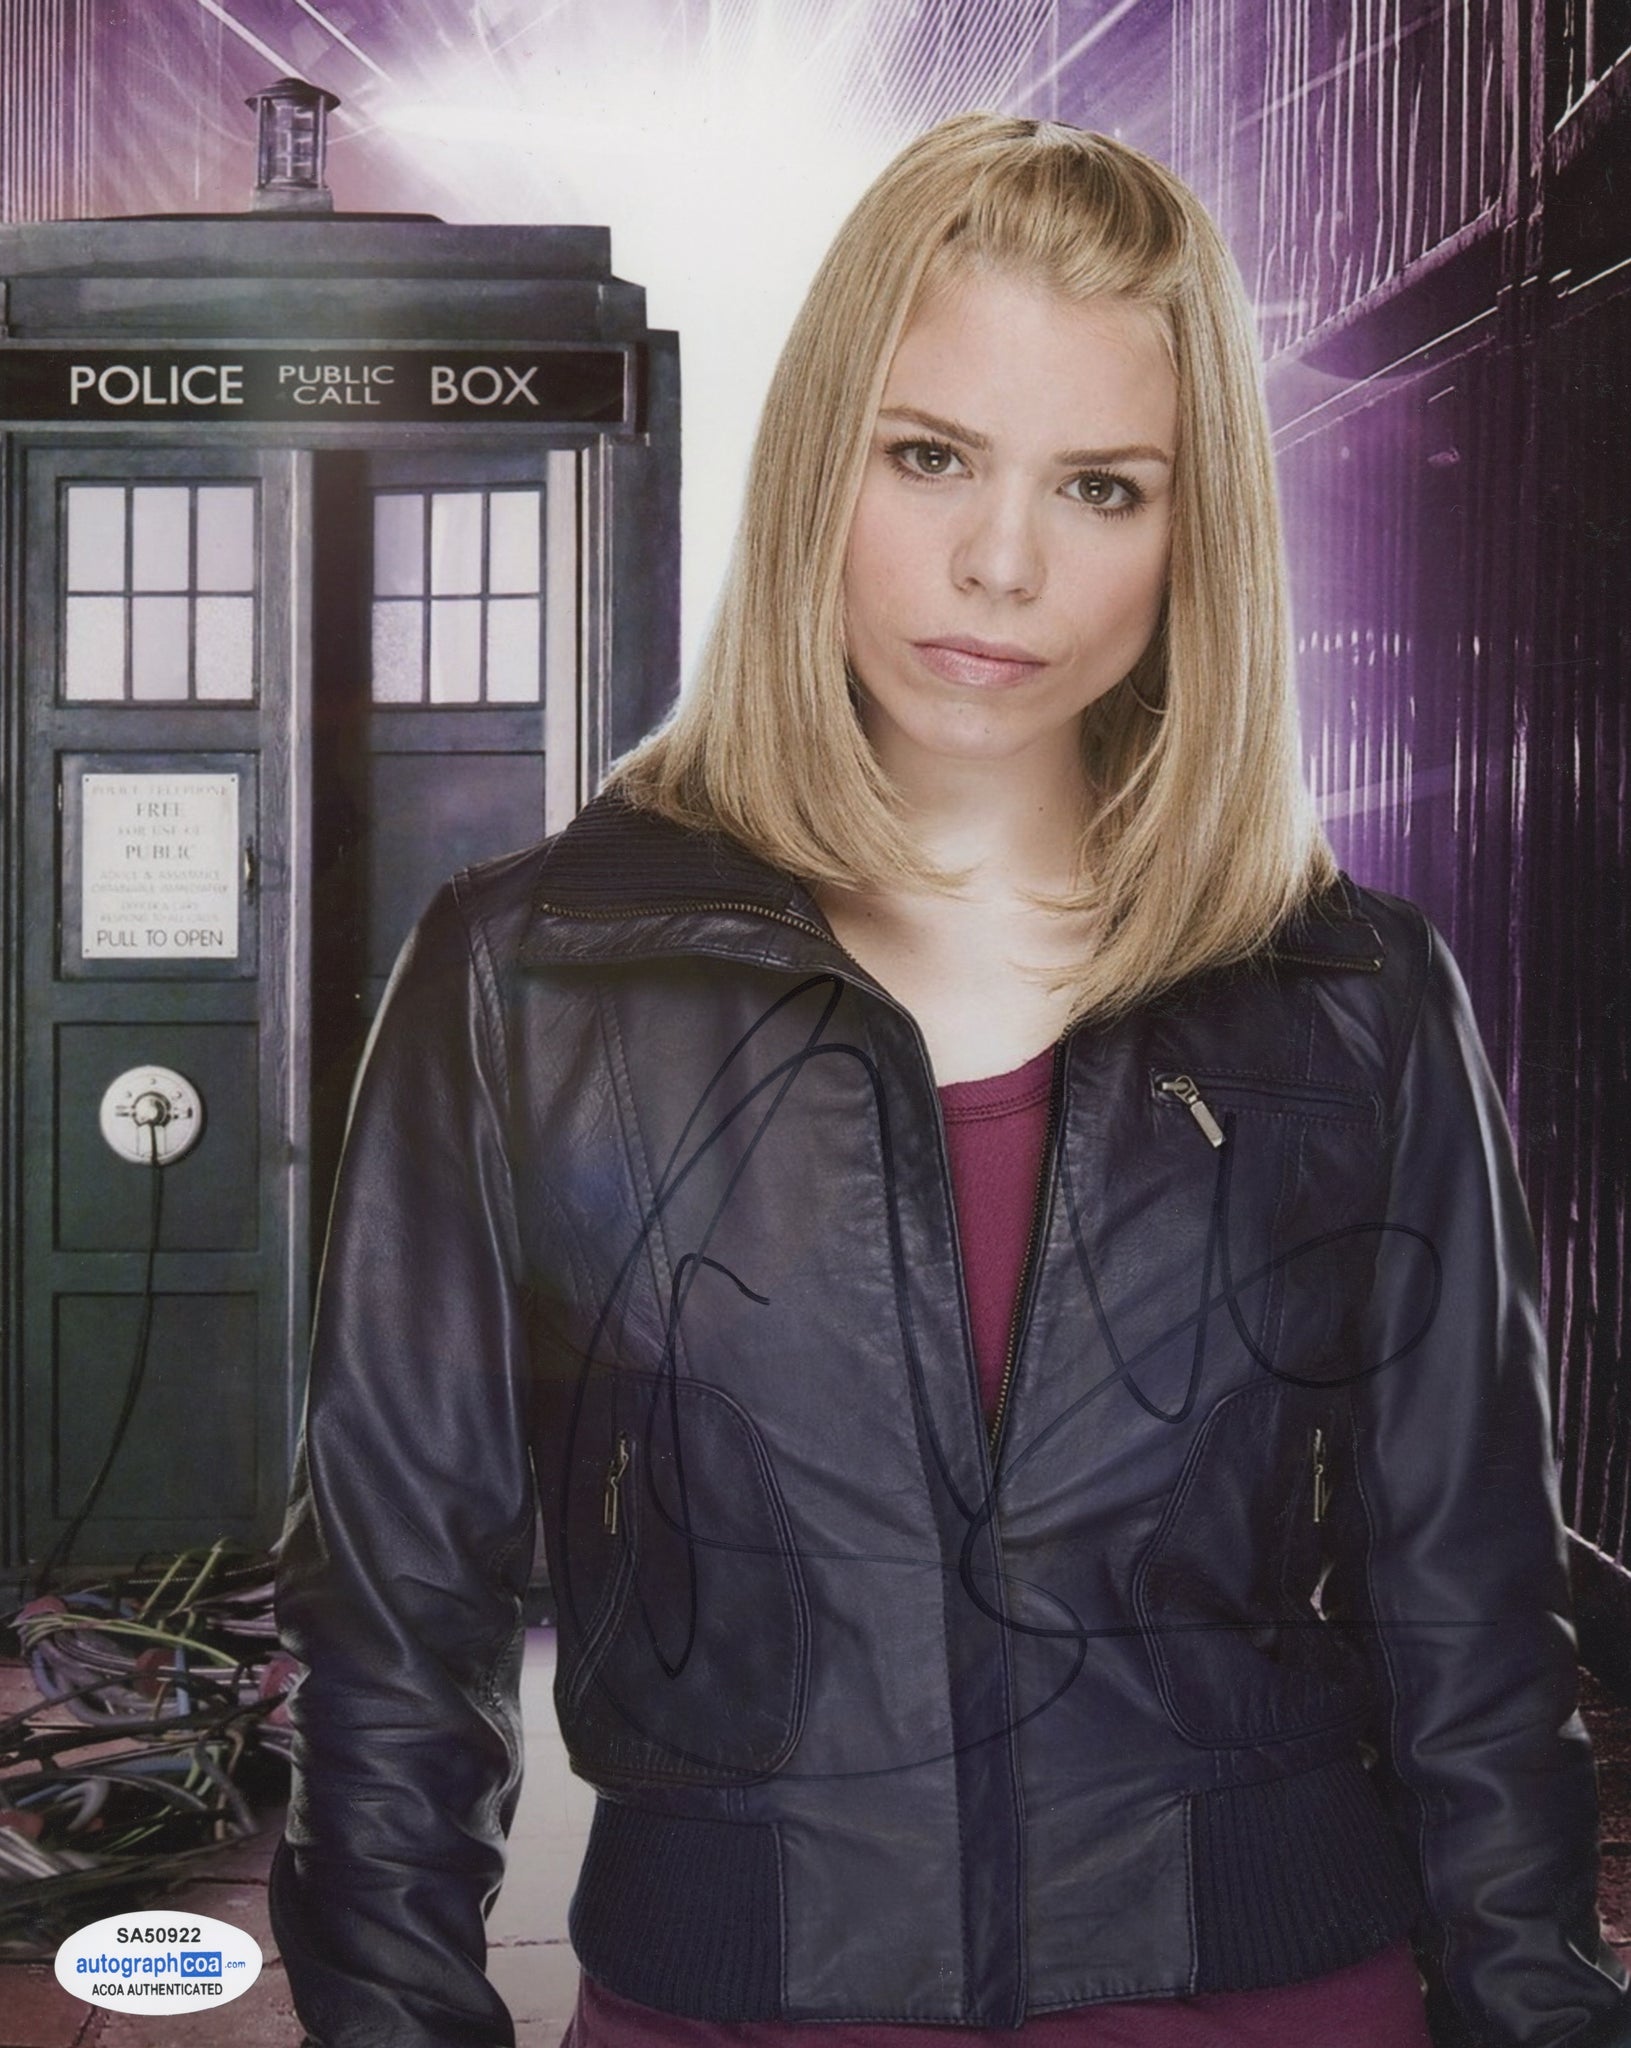 Billie Piper Sexy Doctor Who Signed Autograph 8x10 Photo ACOA